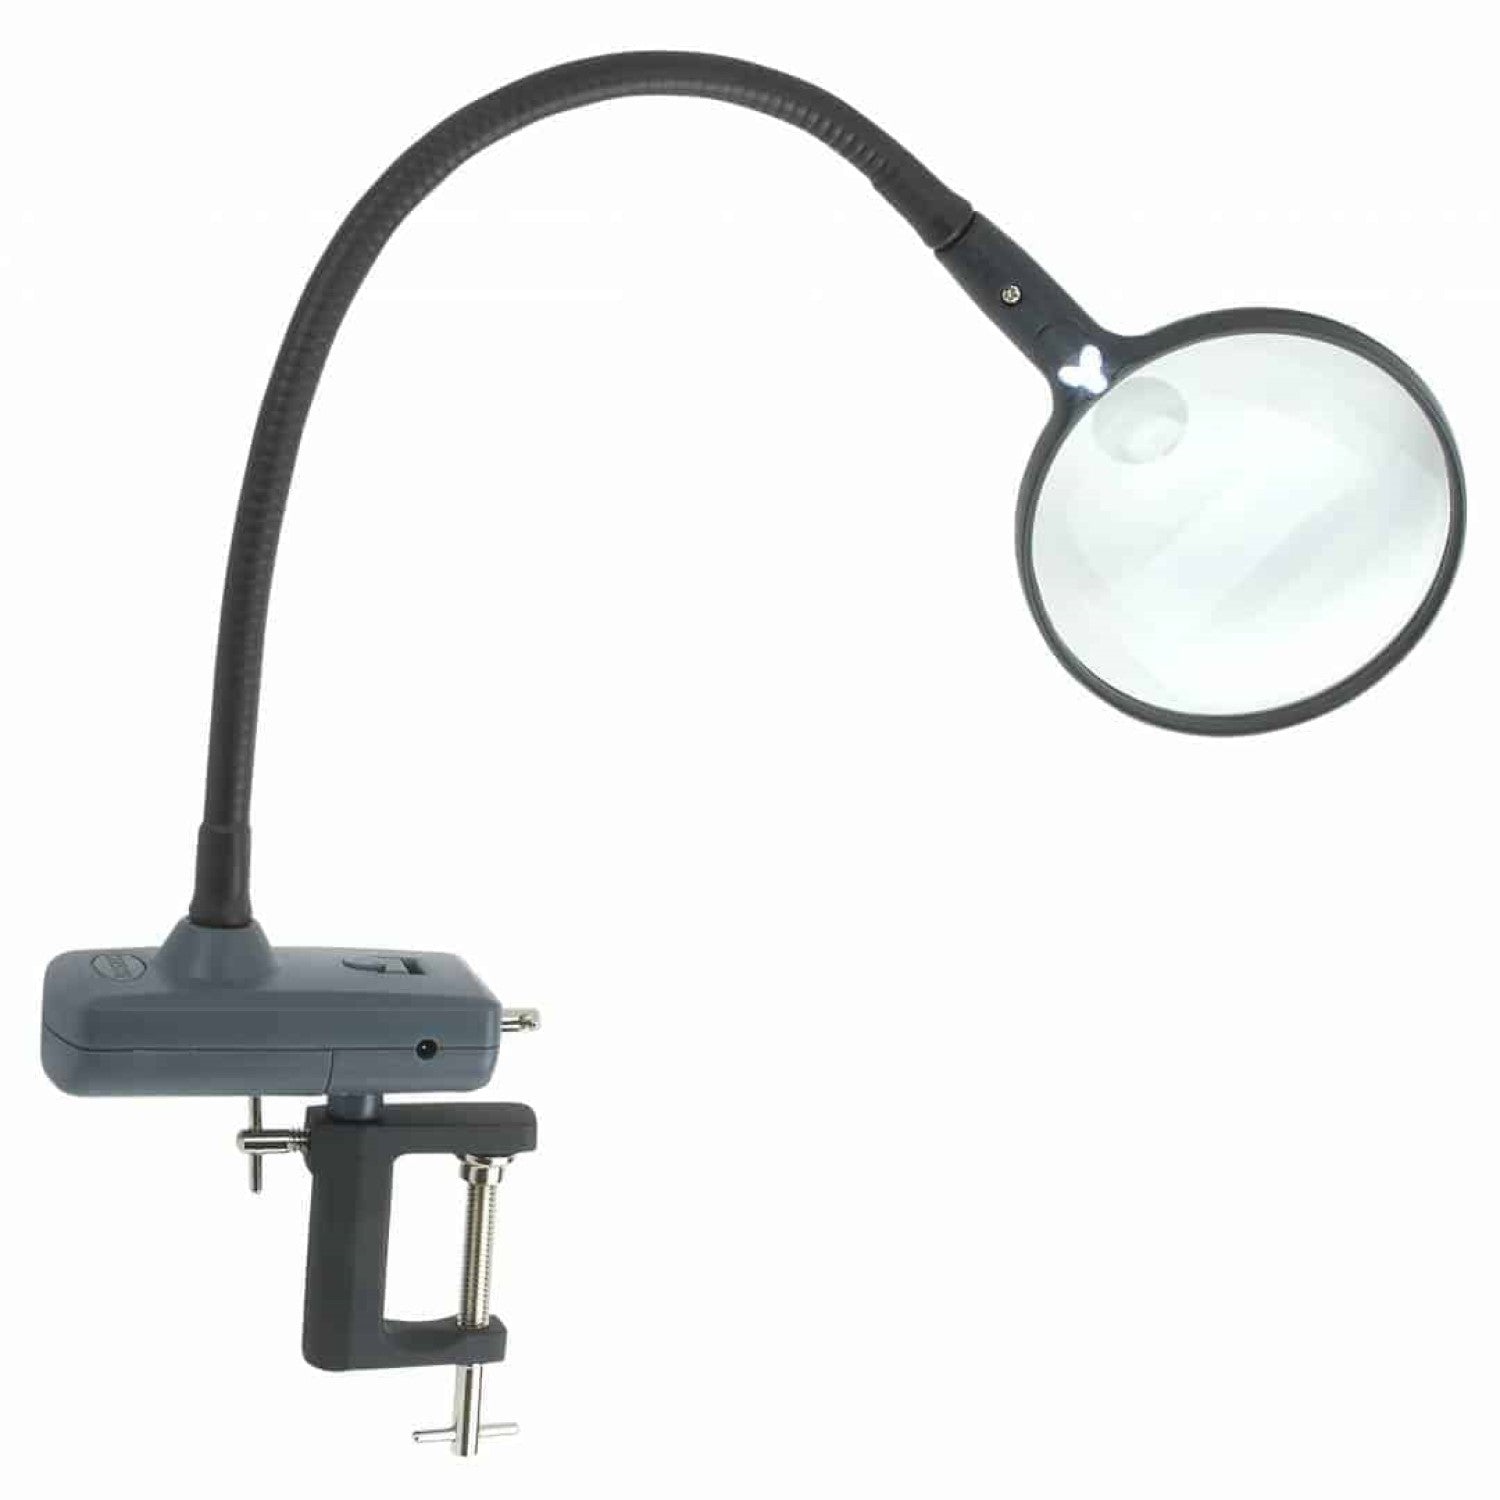 Image of  Magniflex magnifier with clamp attachment.